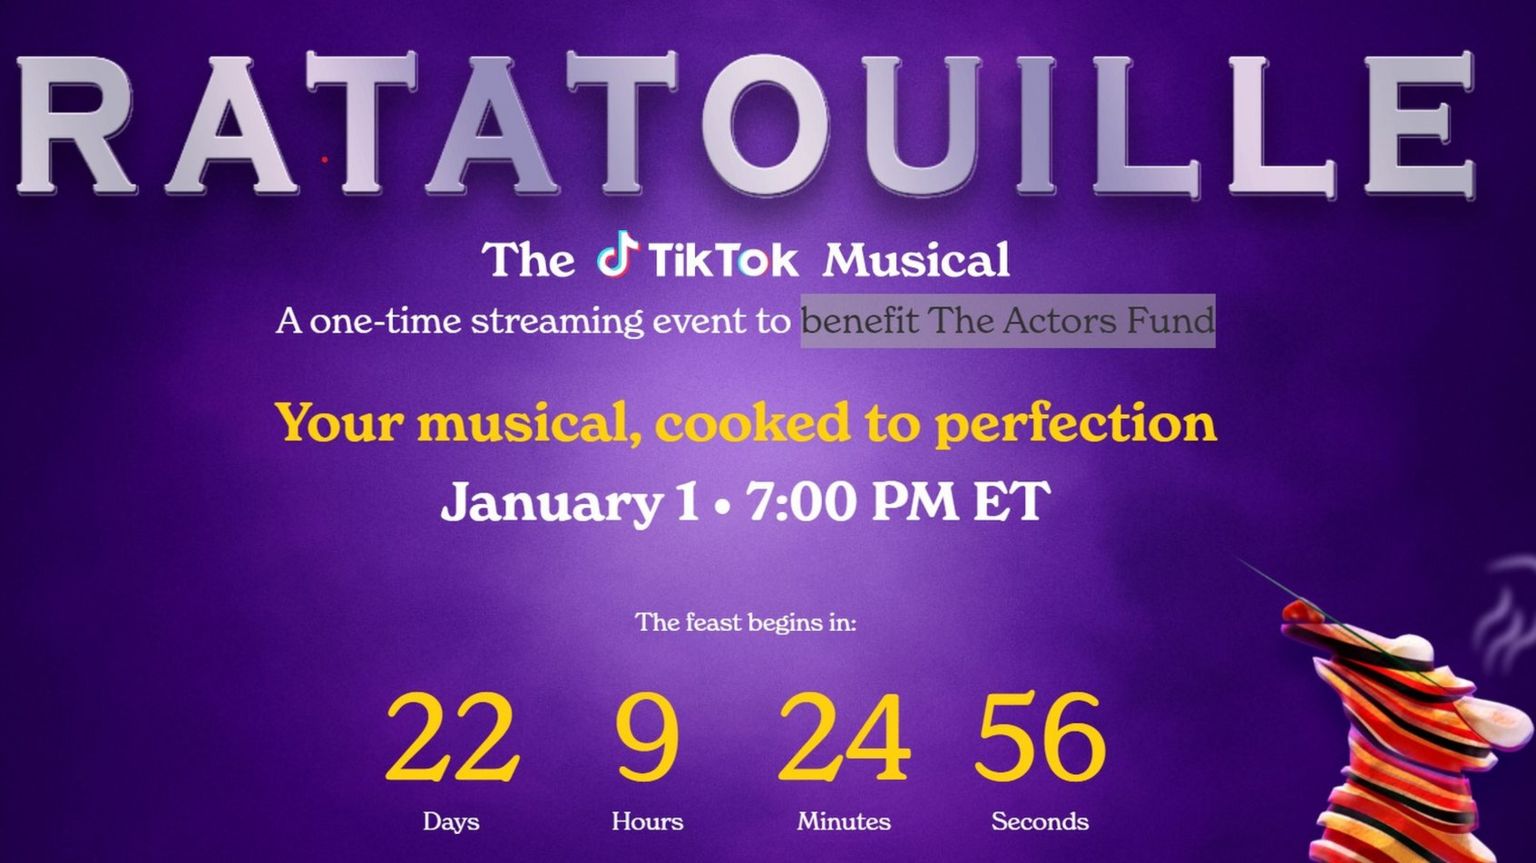 Screen grab of the online ad for Ratatouille the Tik Tok musical